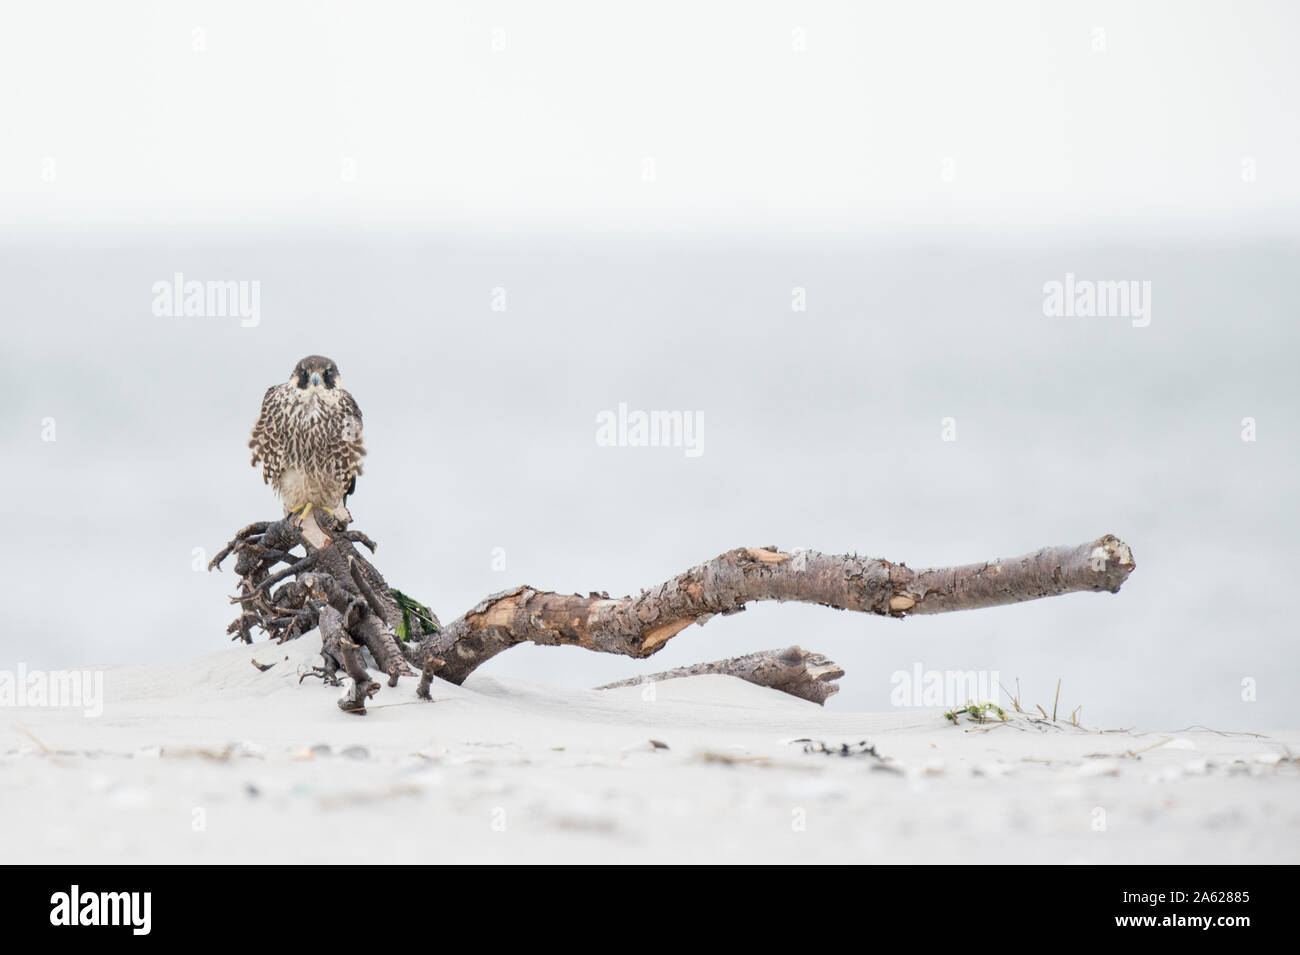 A Peregrine Falcon perched on a piece of driftwood on the wide open beach in soft overcast light. Stock Photo